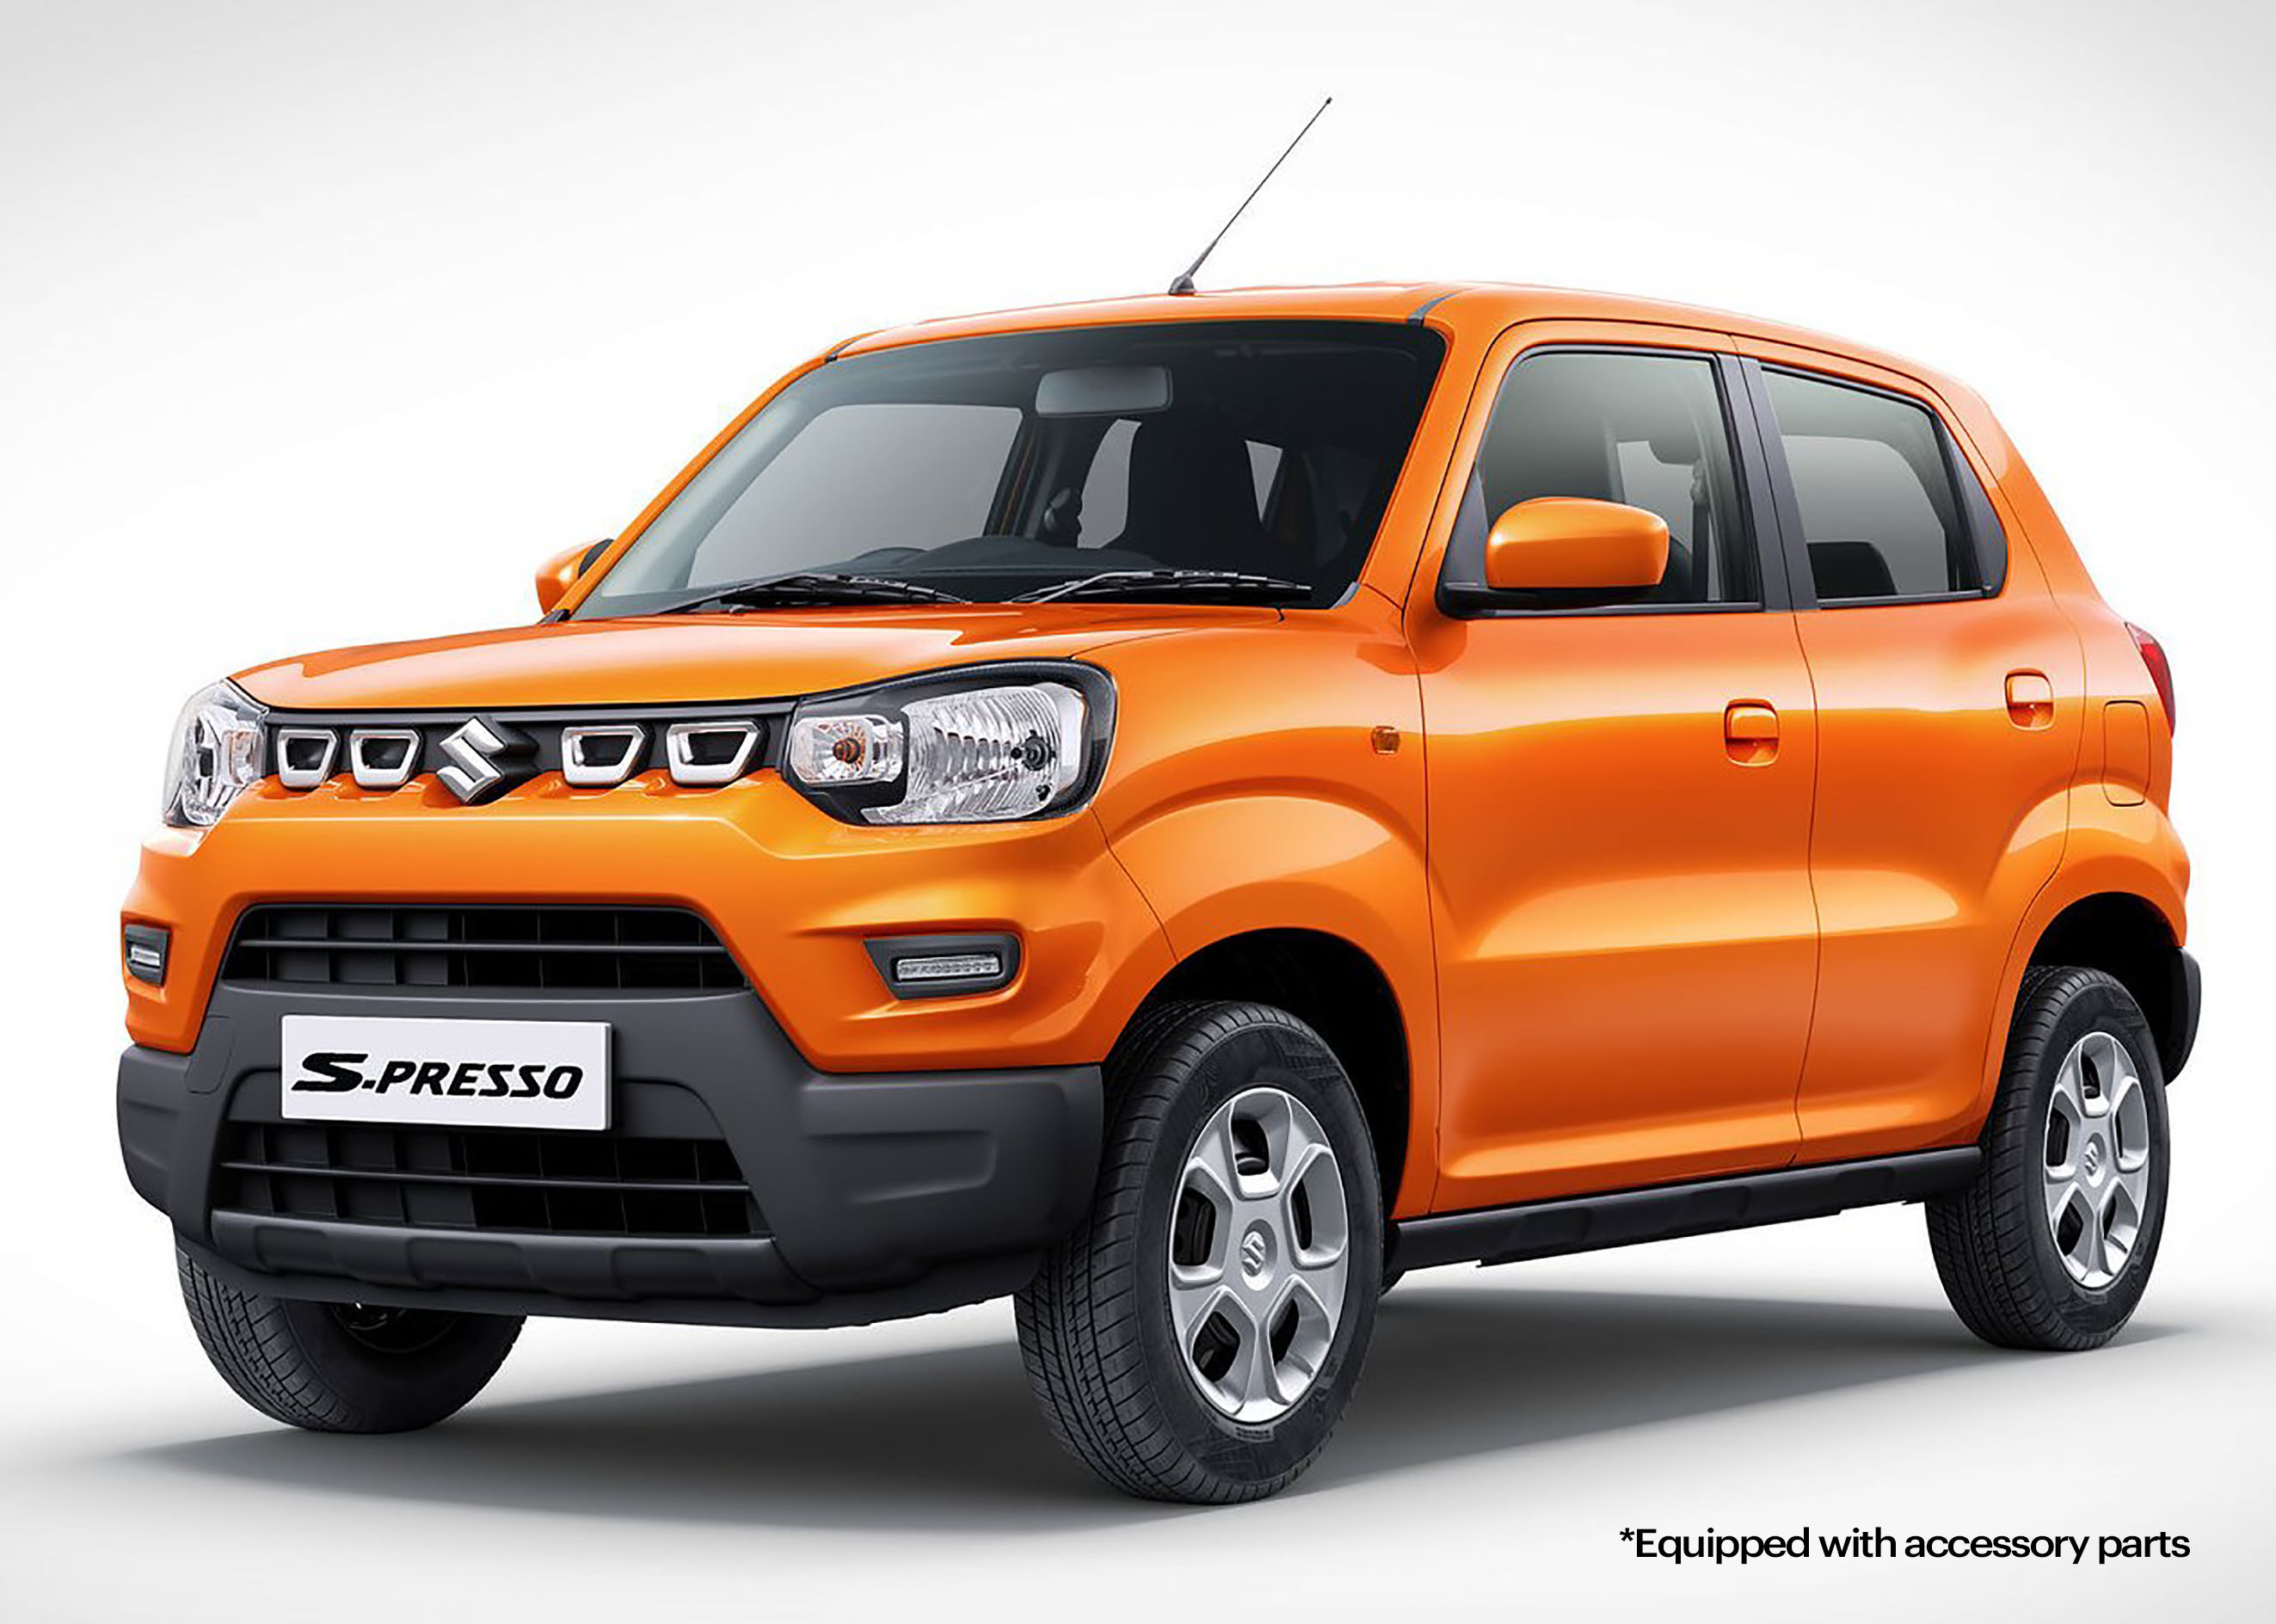 Maruti Suzuki S-PRESSO debuts as one of Indias top 10 bestselling cars within a month of its launch (3)